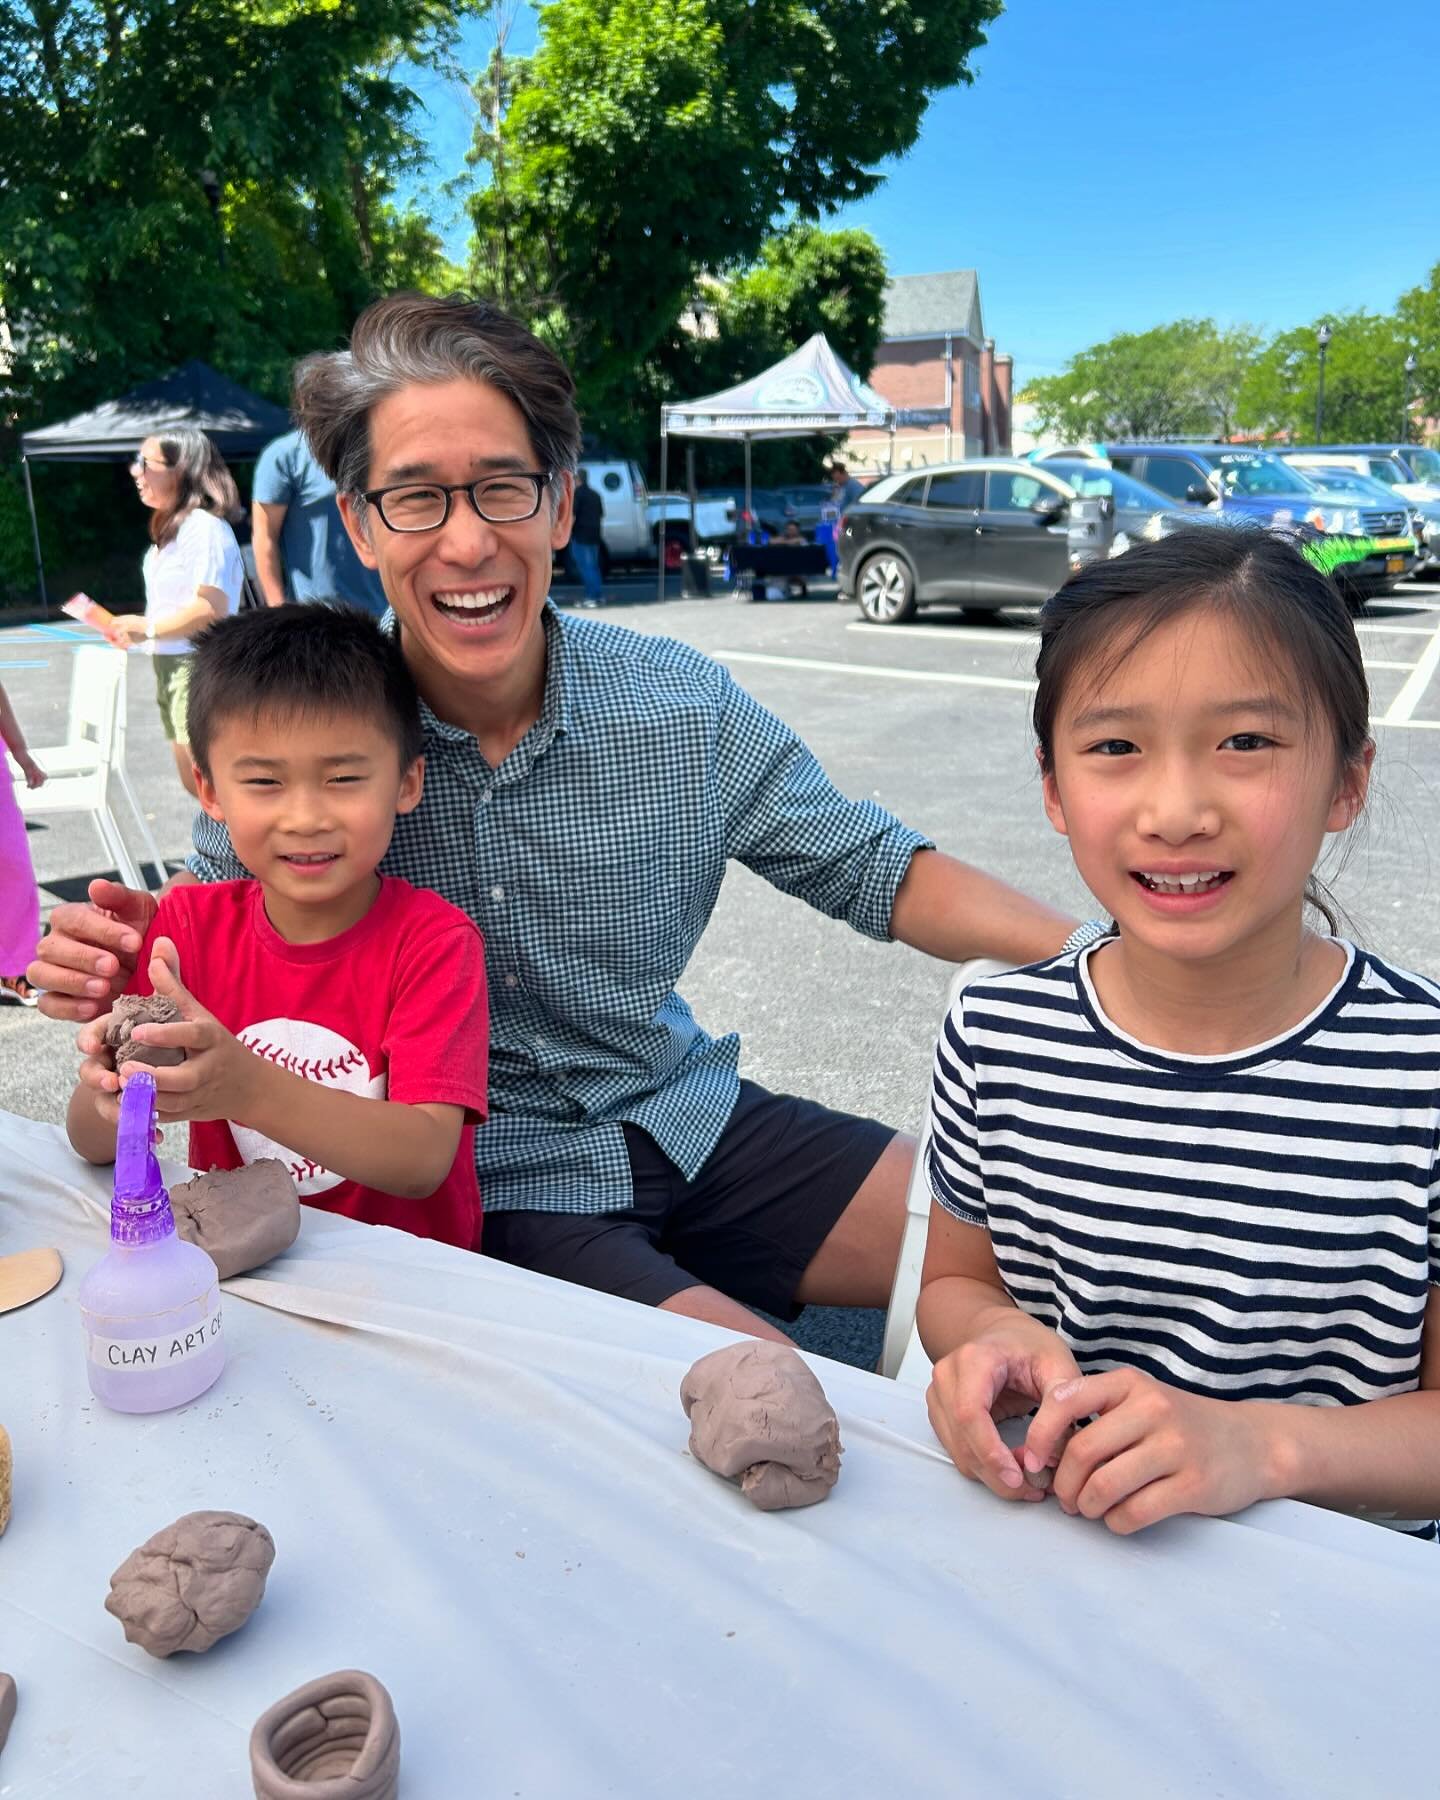 How many smiles can you count at Clay Art Center today? Sunshine and creative fun at the Port Chester Arts Festival. We are here until 3pm!

Clay Art Center is located at 40 Beech Street, Port Chester NY 10573

#artsfestival #festival #art #clay #por